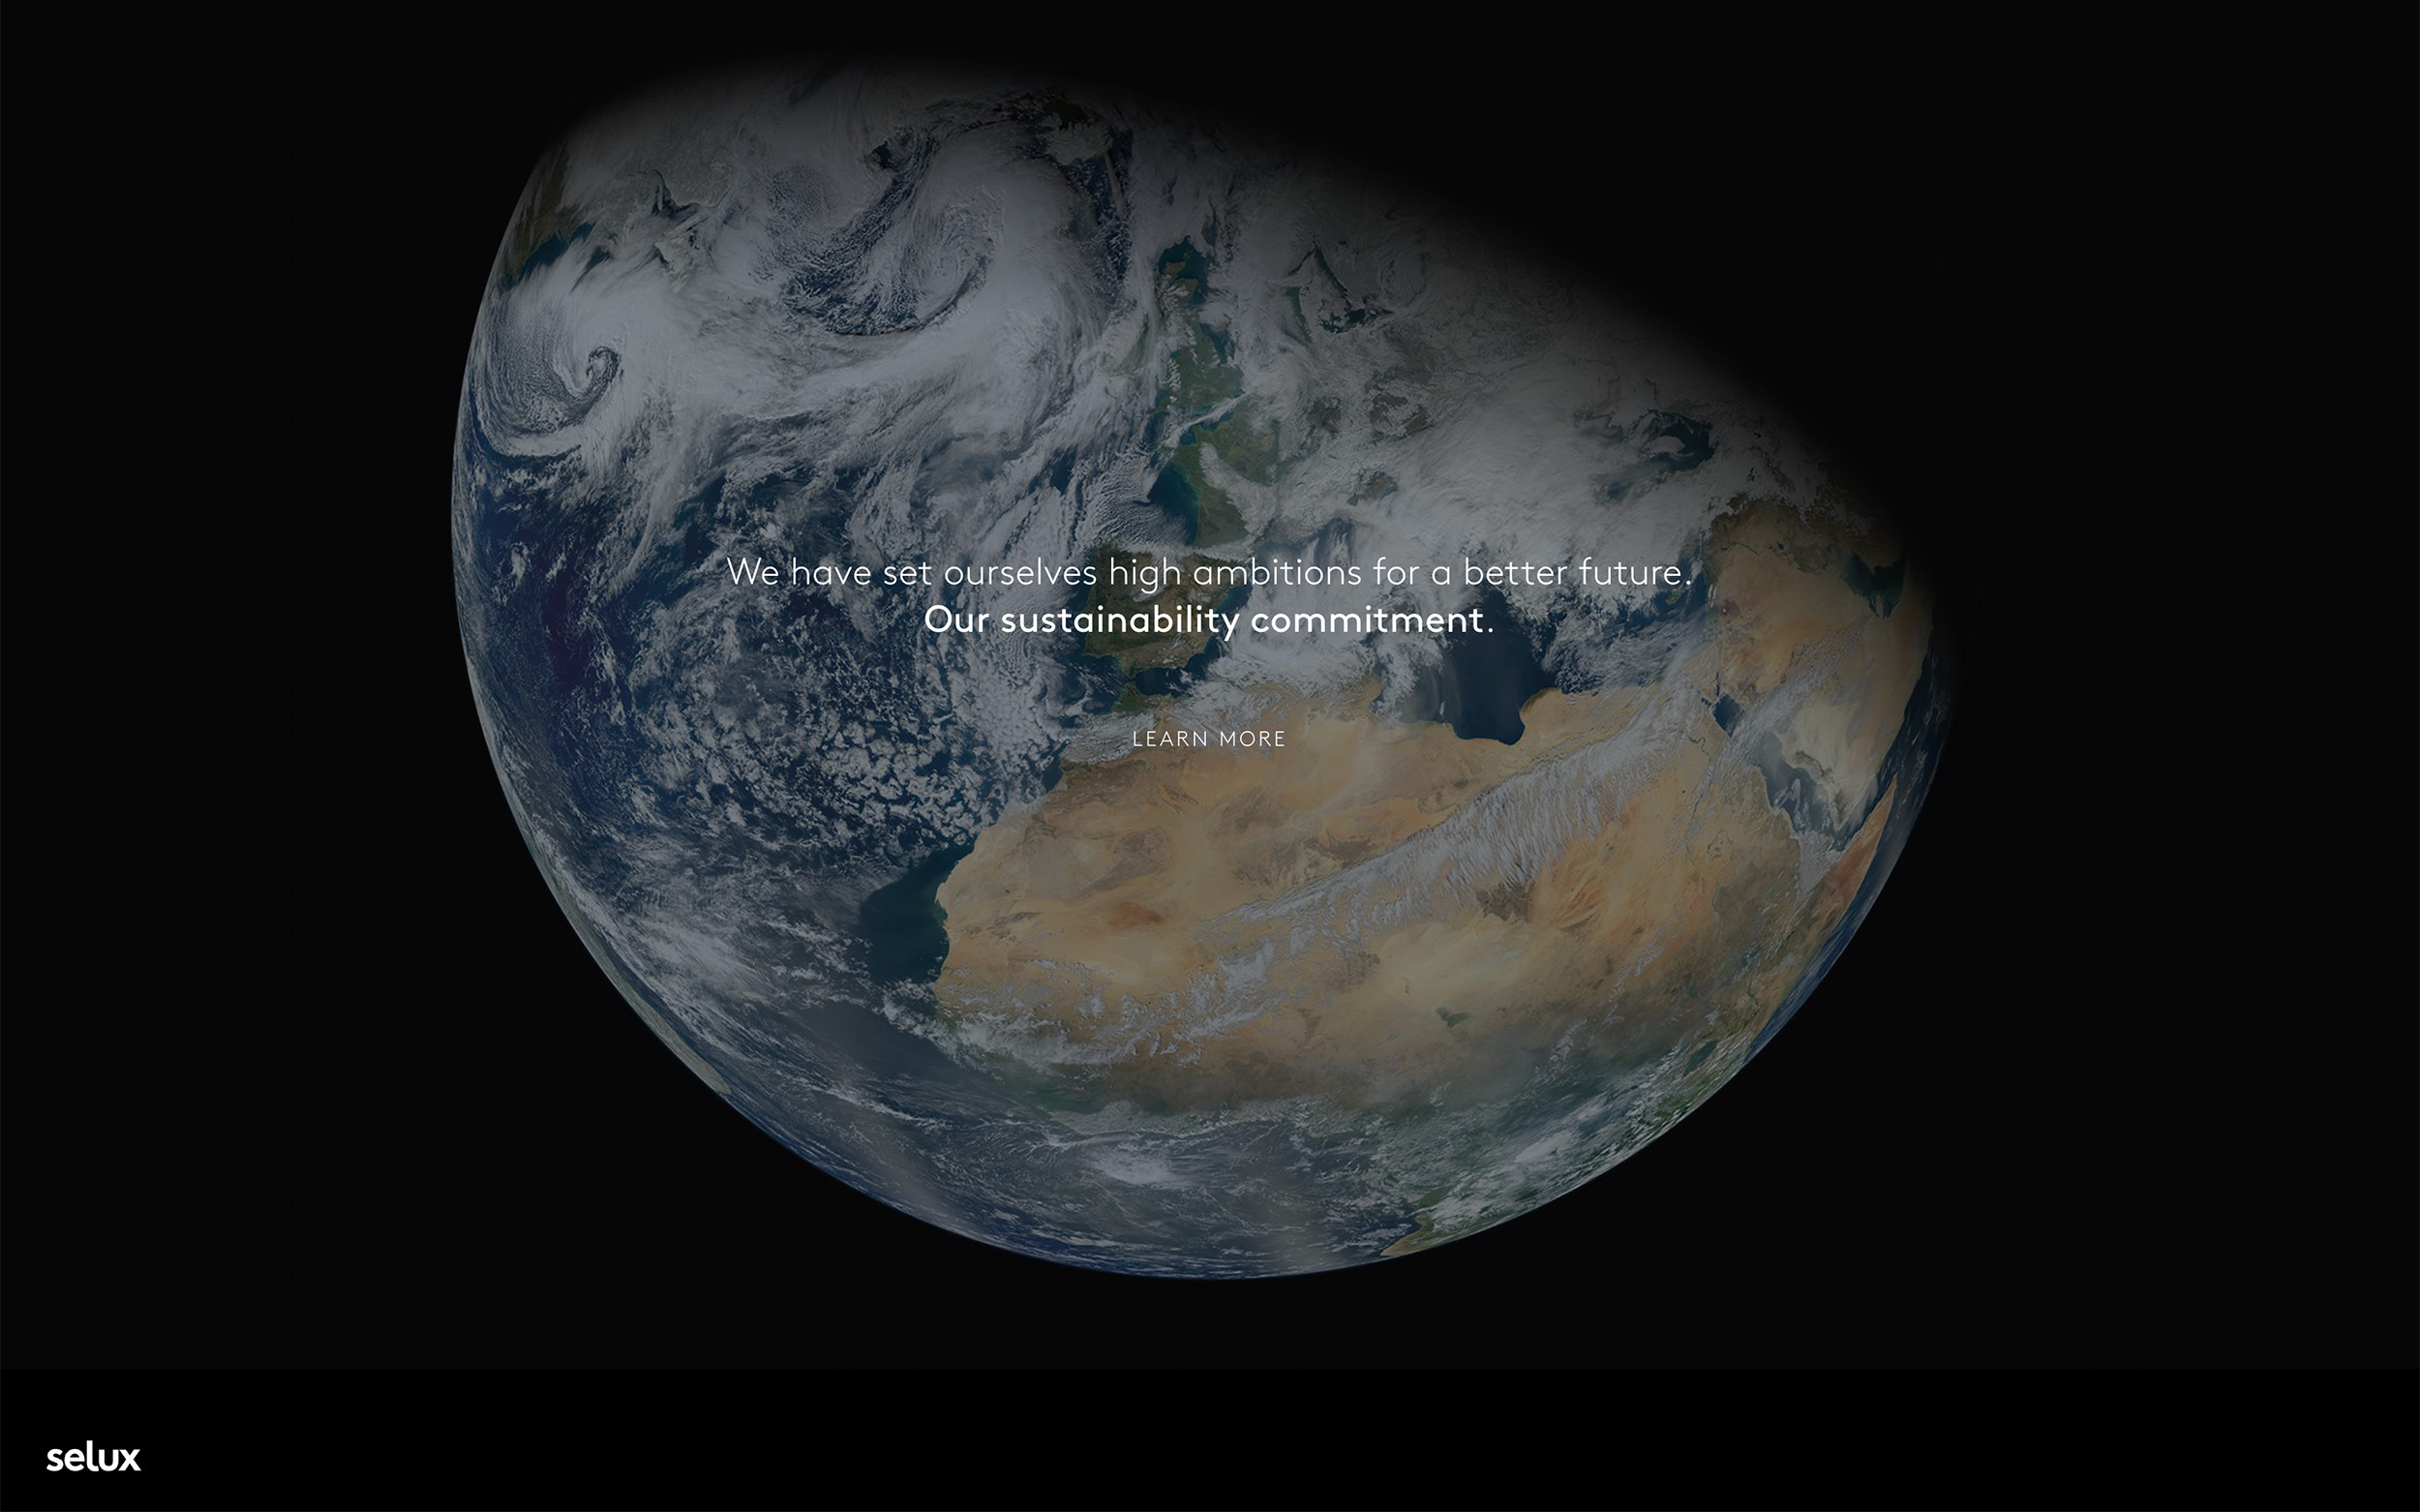 Image of Earth on a black background with a superimposed statement.